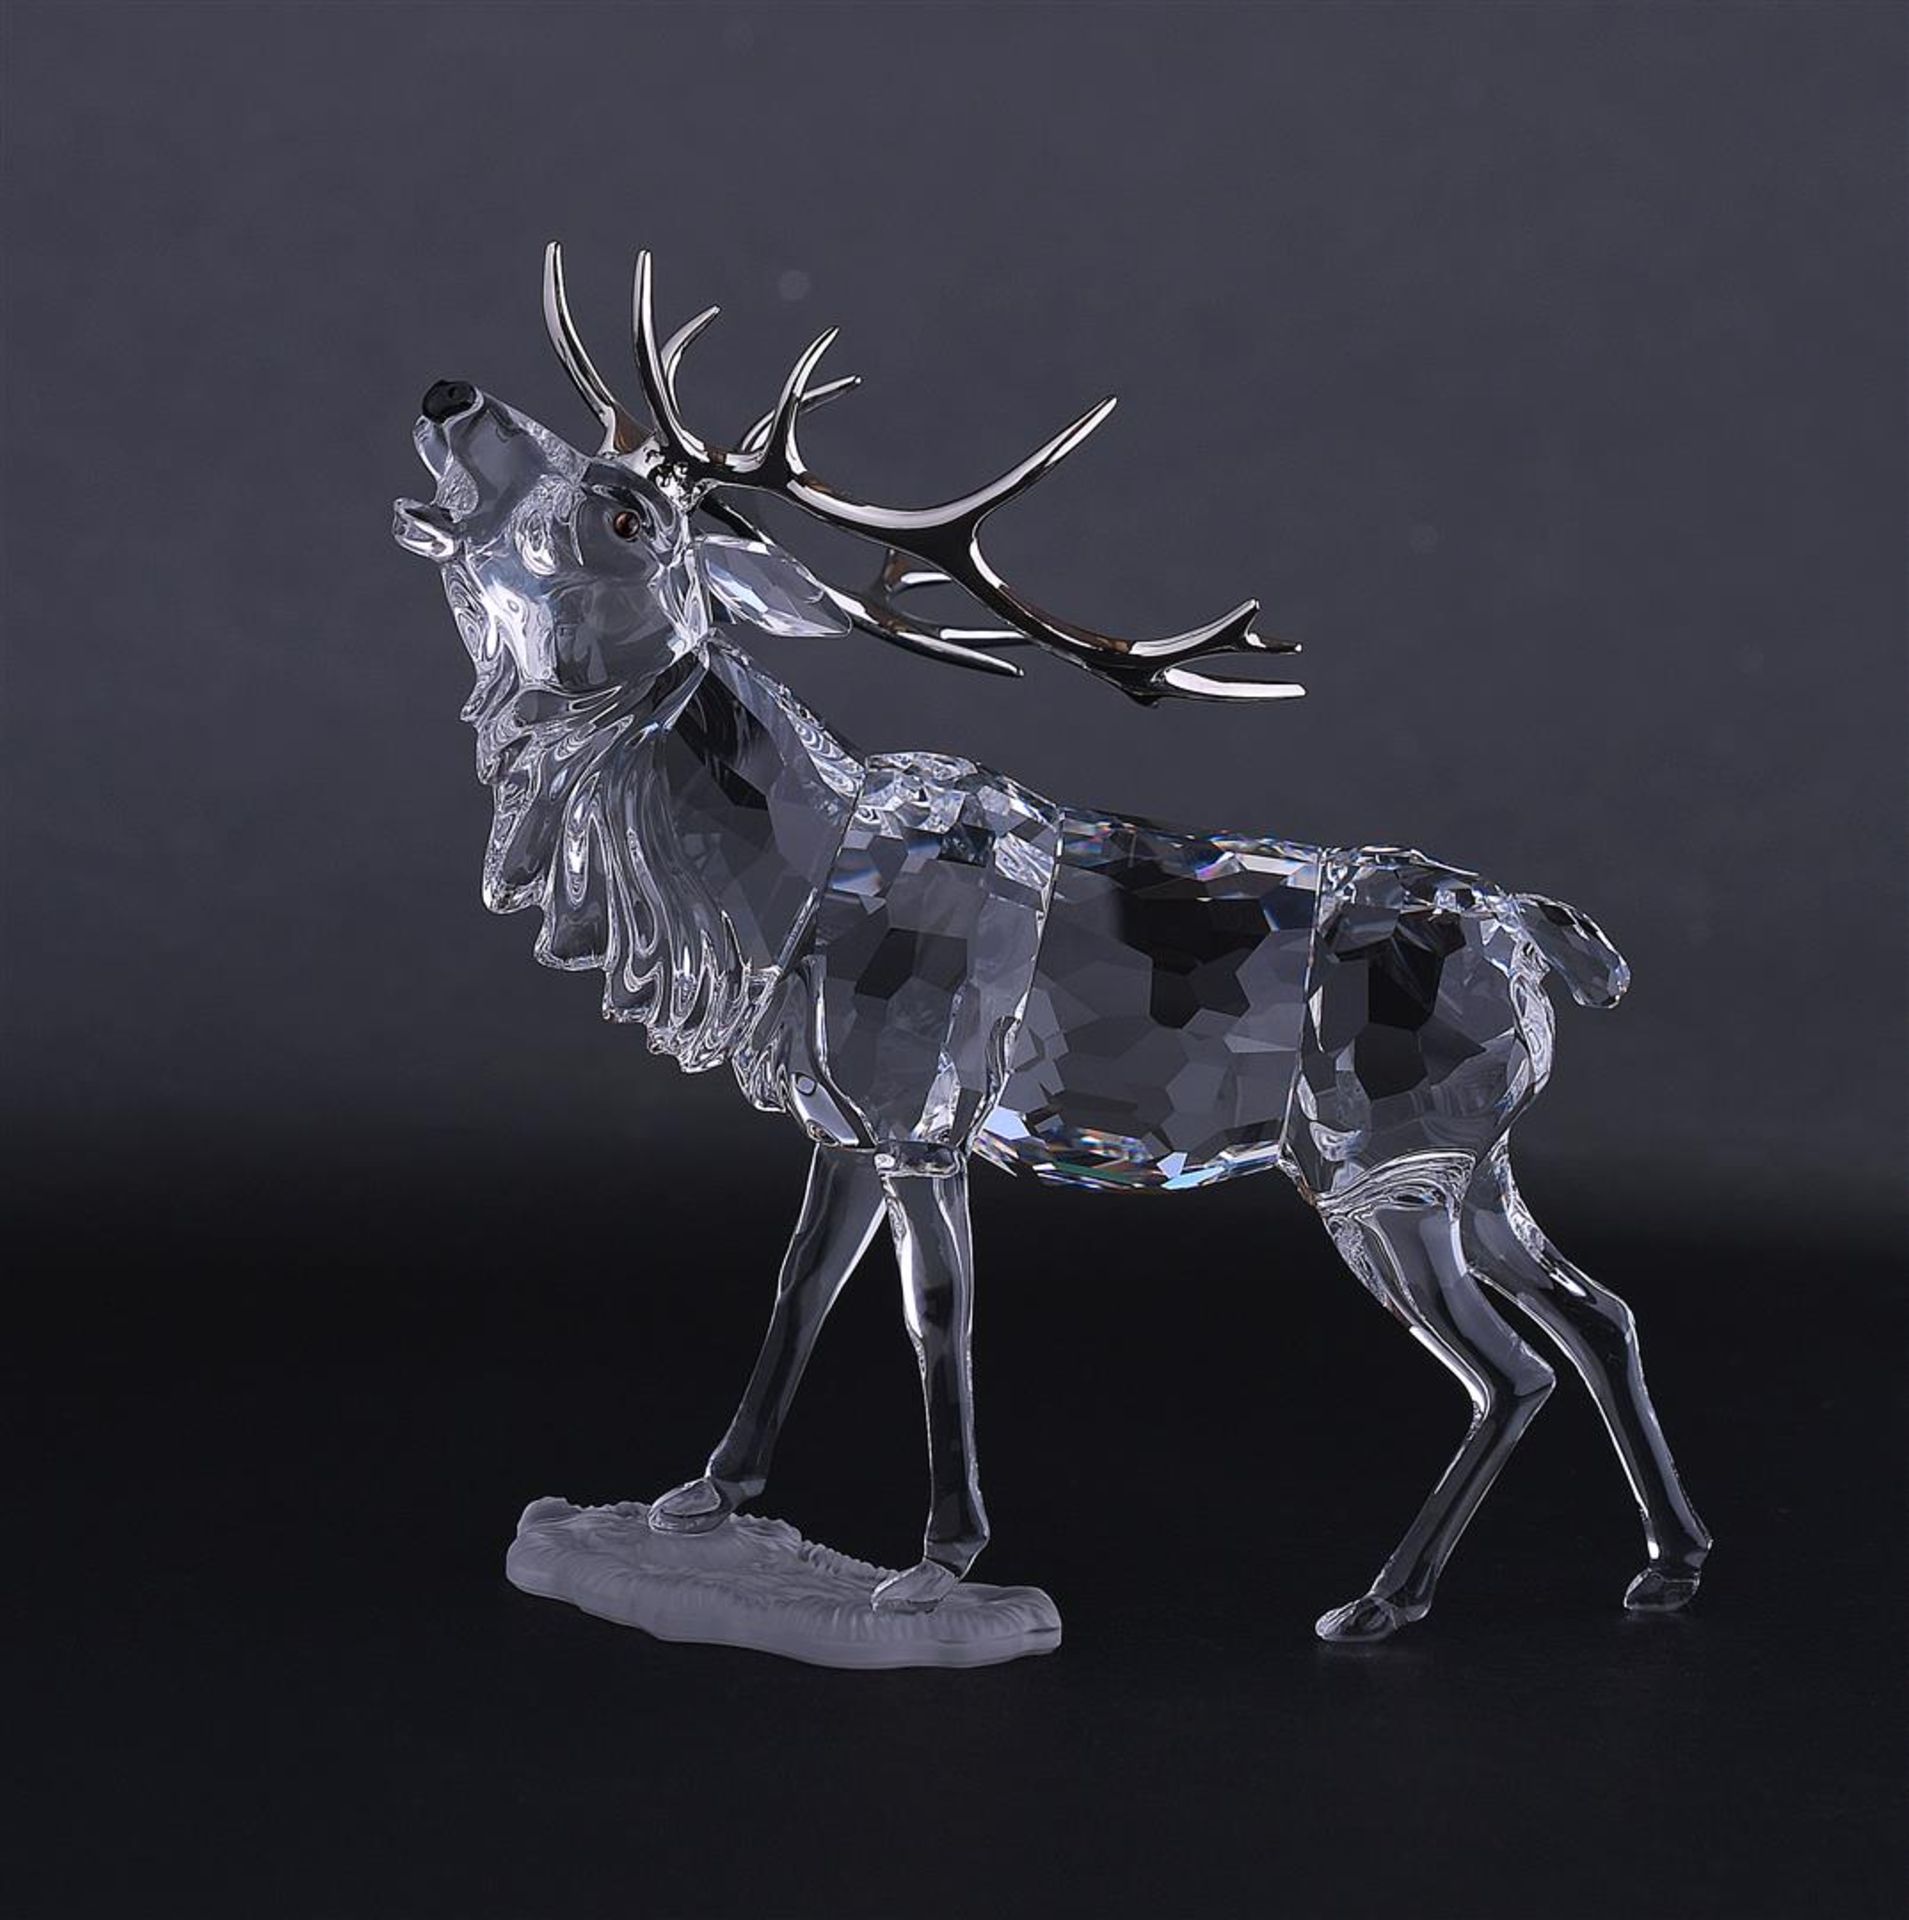 Swarovski, Deer Buck, Year of issue 2002,291431. Includes original box and glass shoe.
17,8 x 13,9 c